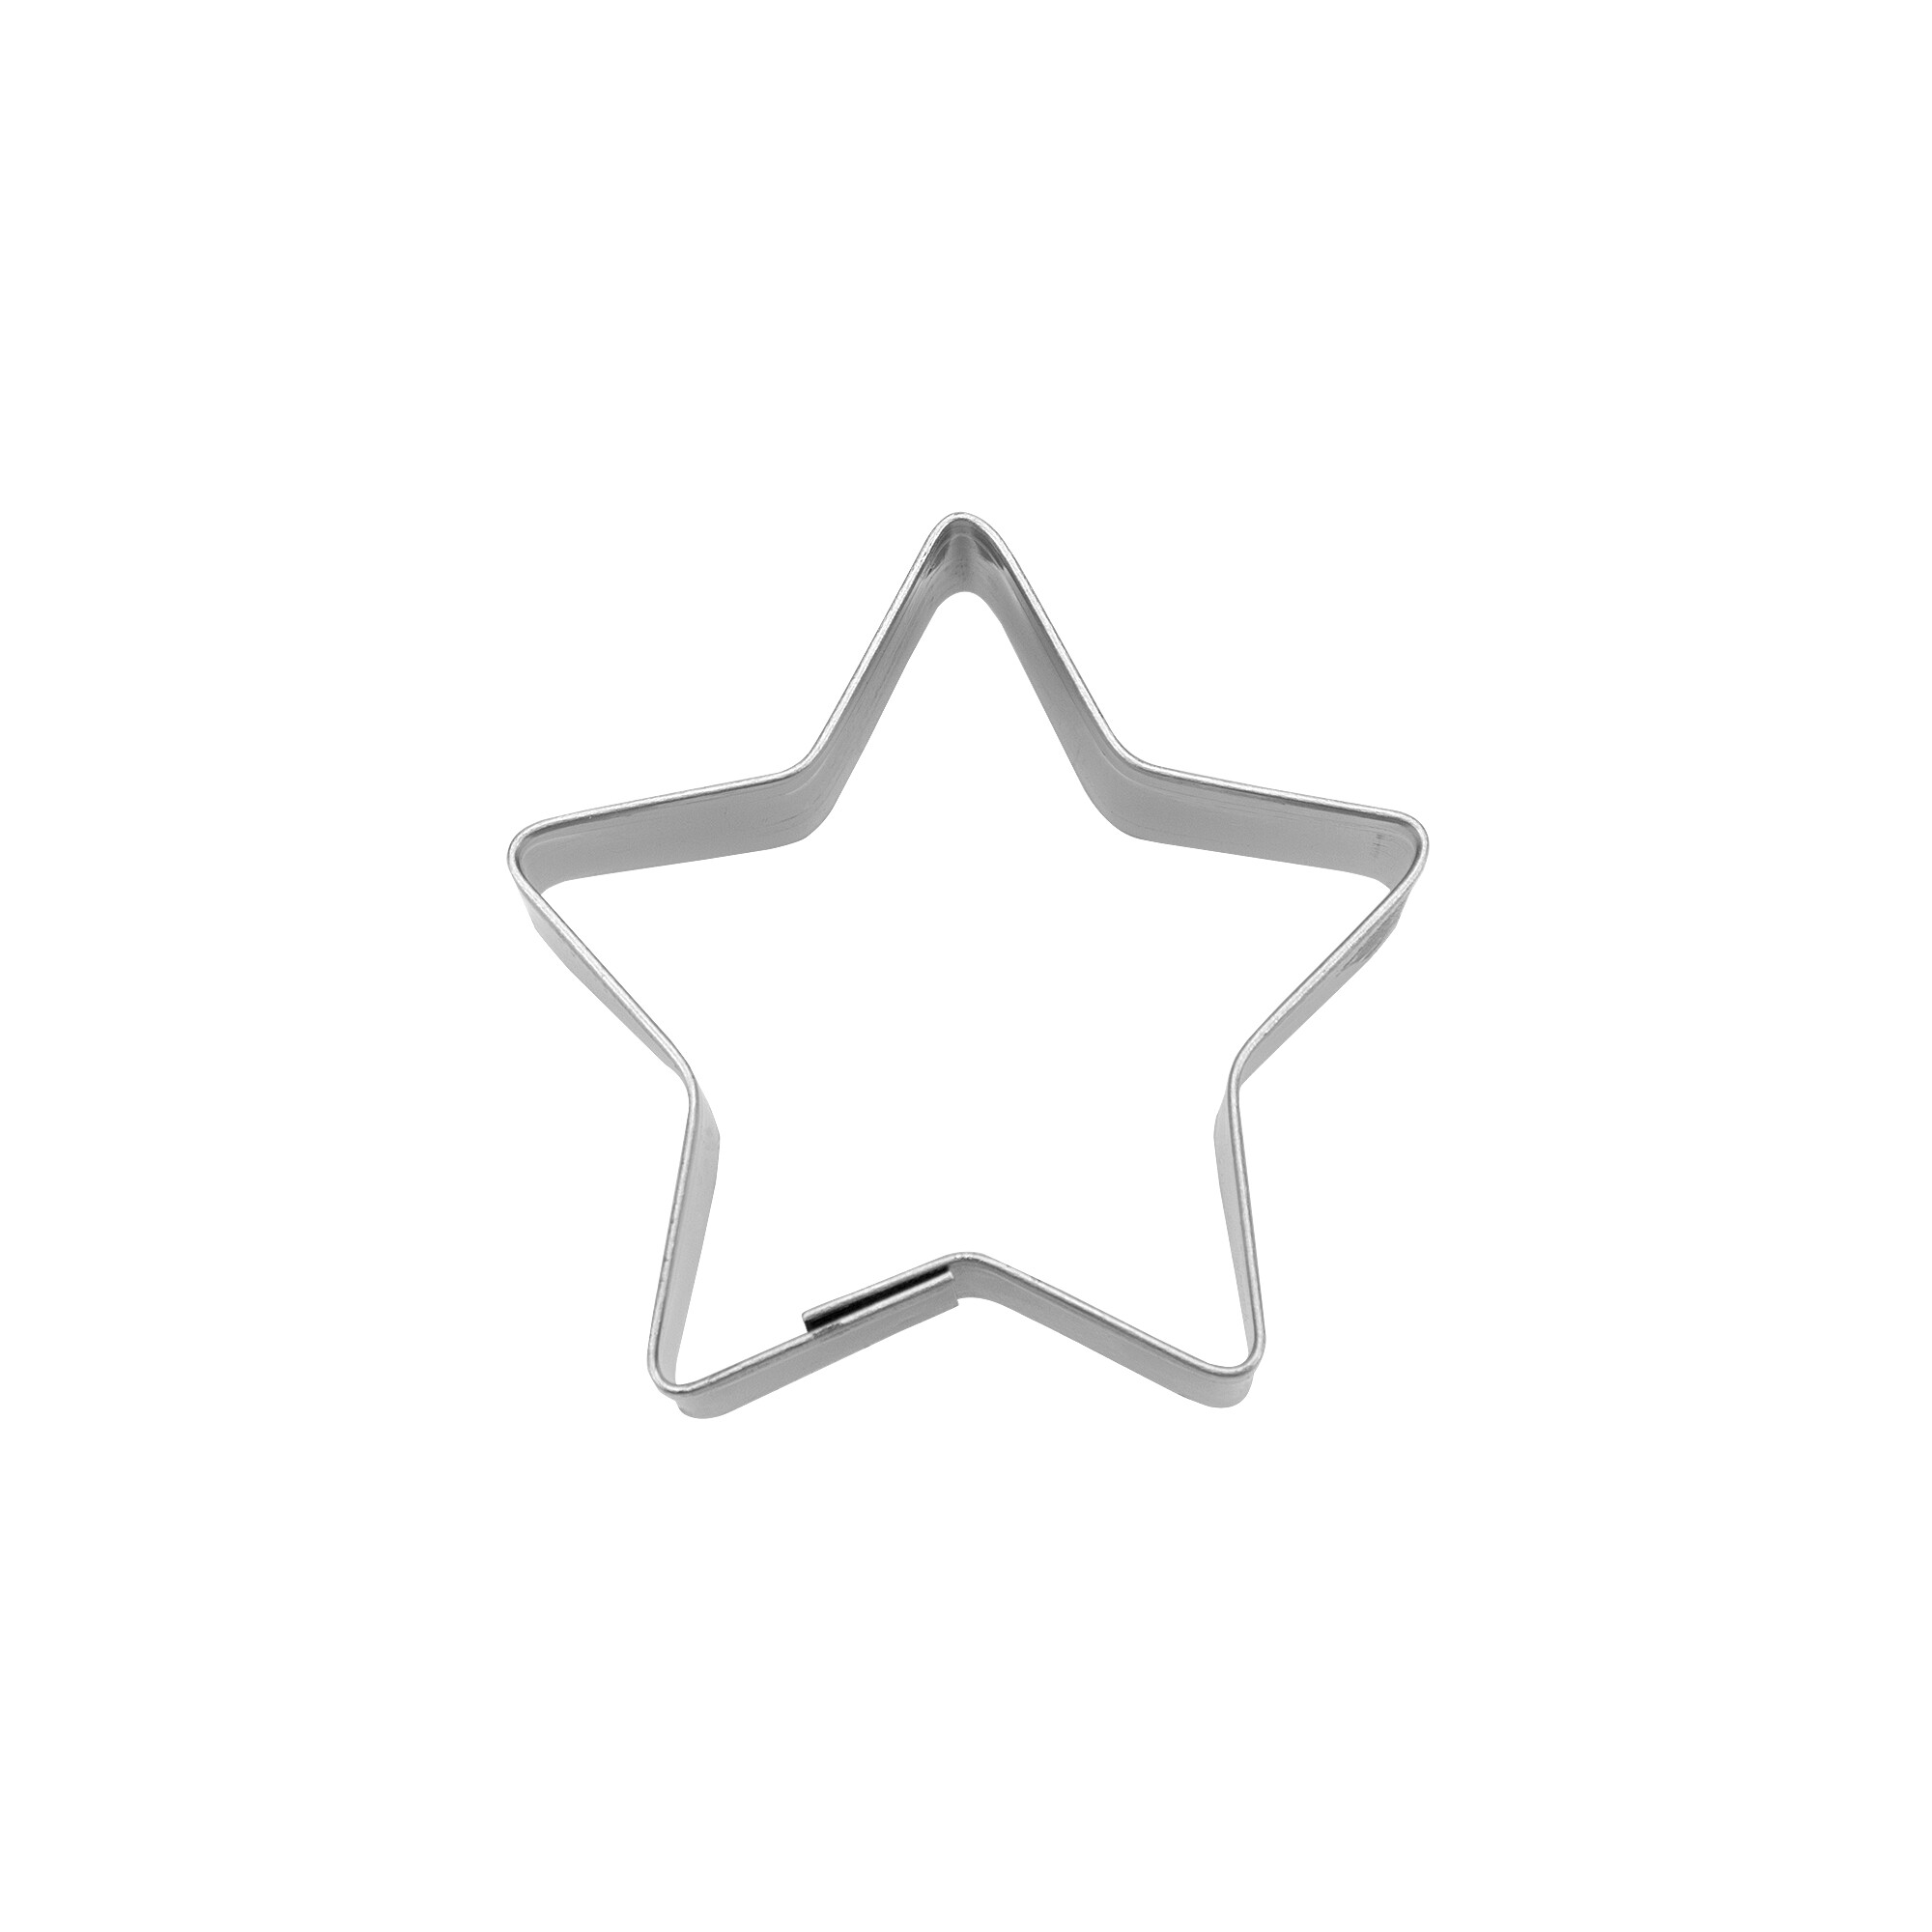 Star – 5-pointed